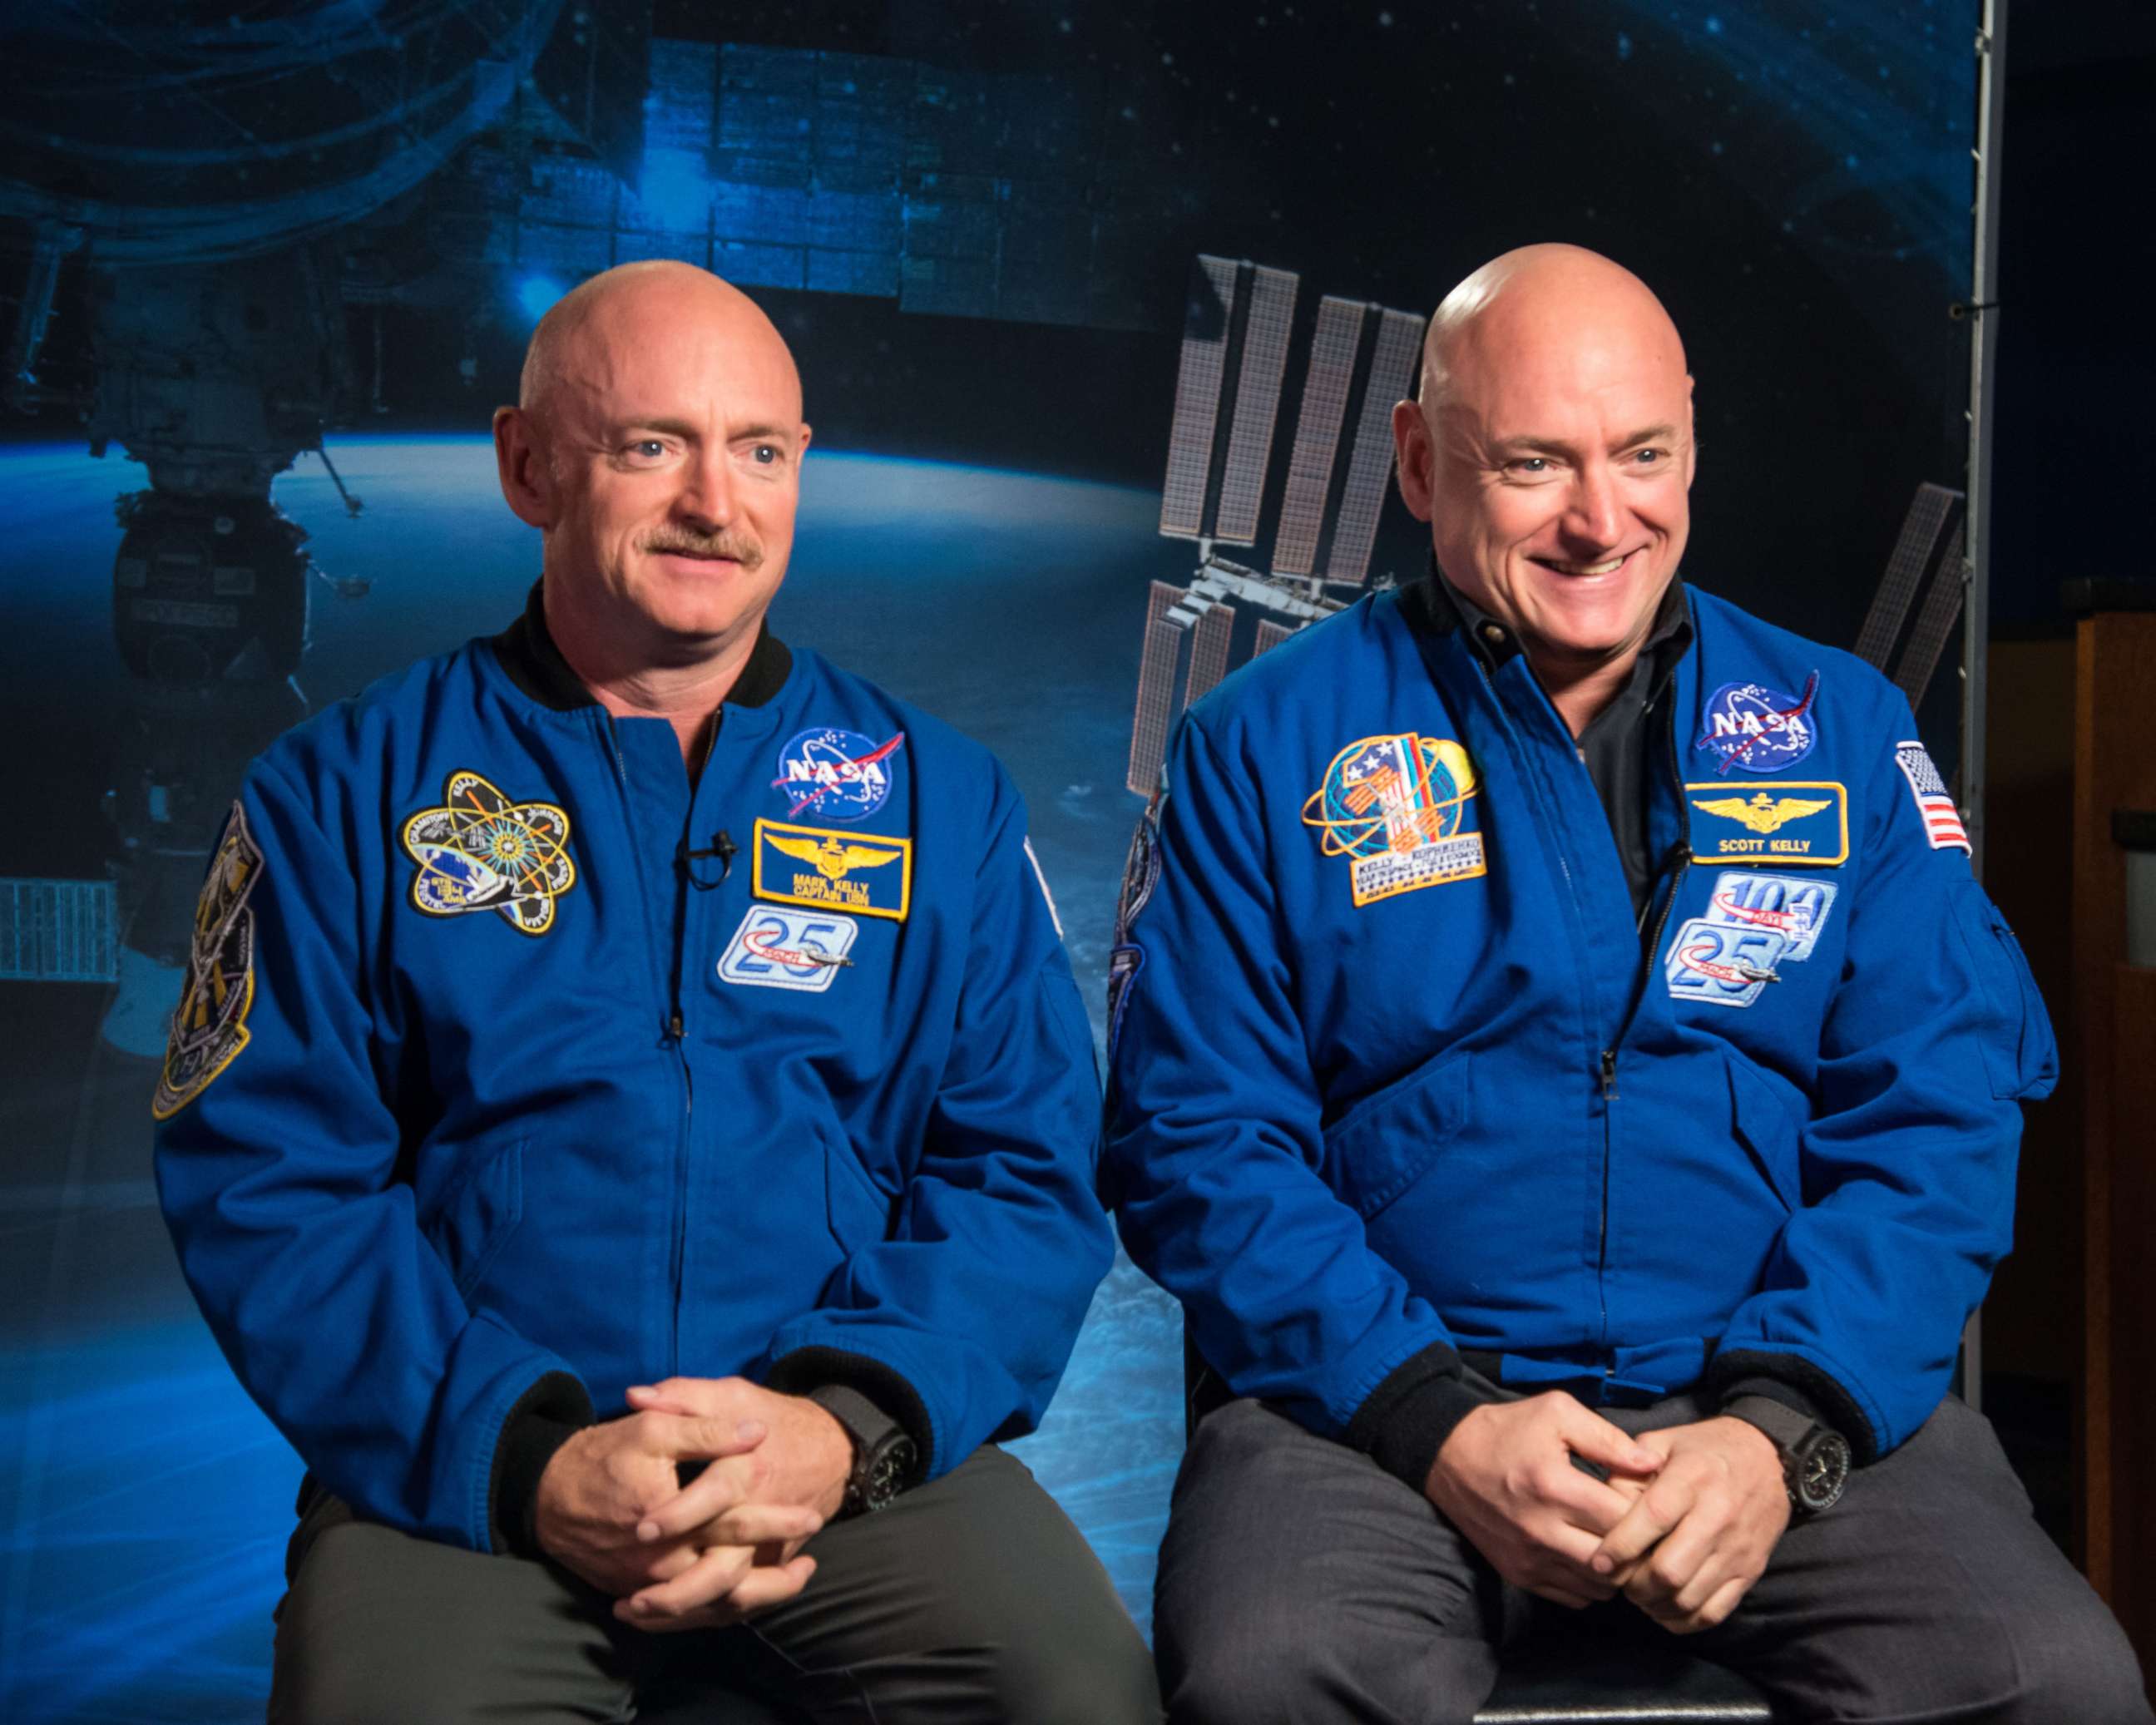 PHOTO: Former Astronaut Mark Kelly and his brother, Astronaut Scott Kelly, speak to news media outlets about Scott Kelly's one-year mission aboard the International Space Station, Jan. 19, 2015.